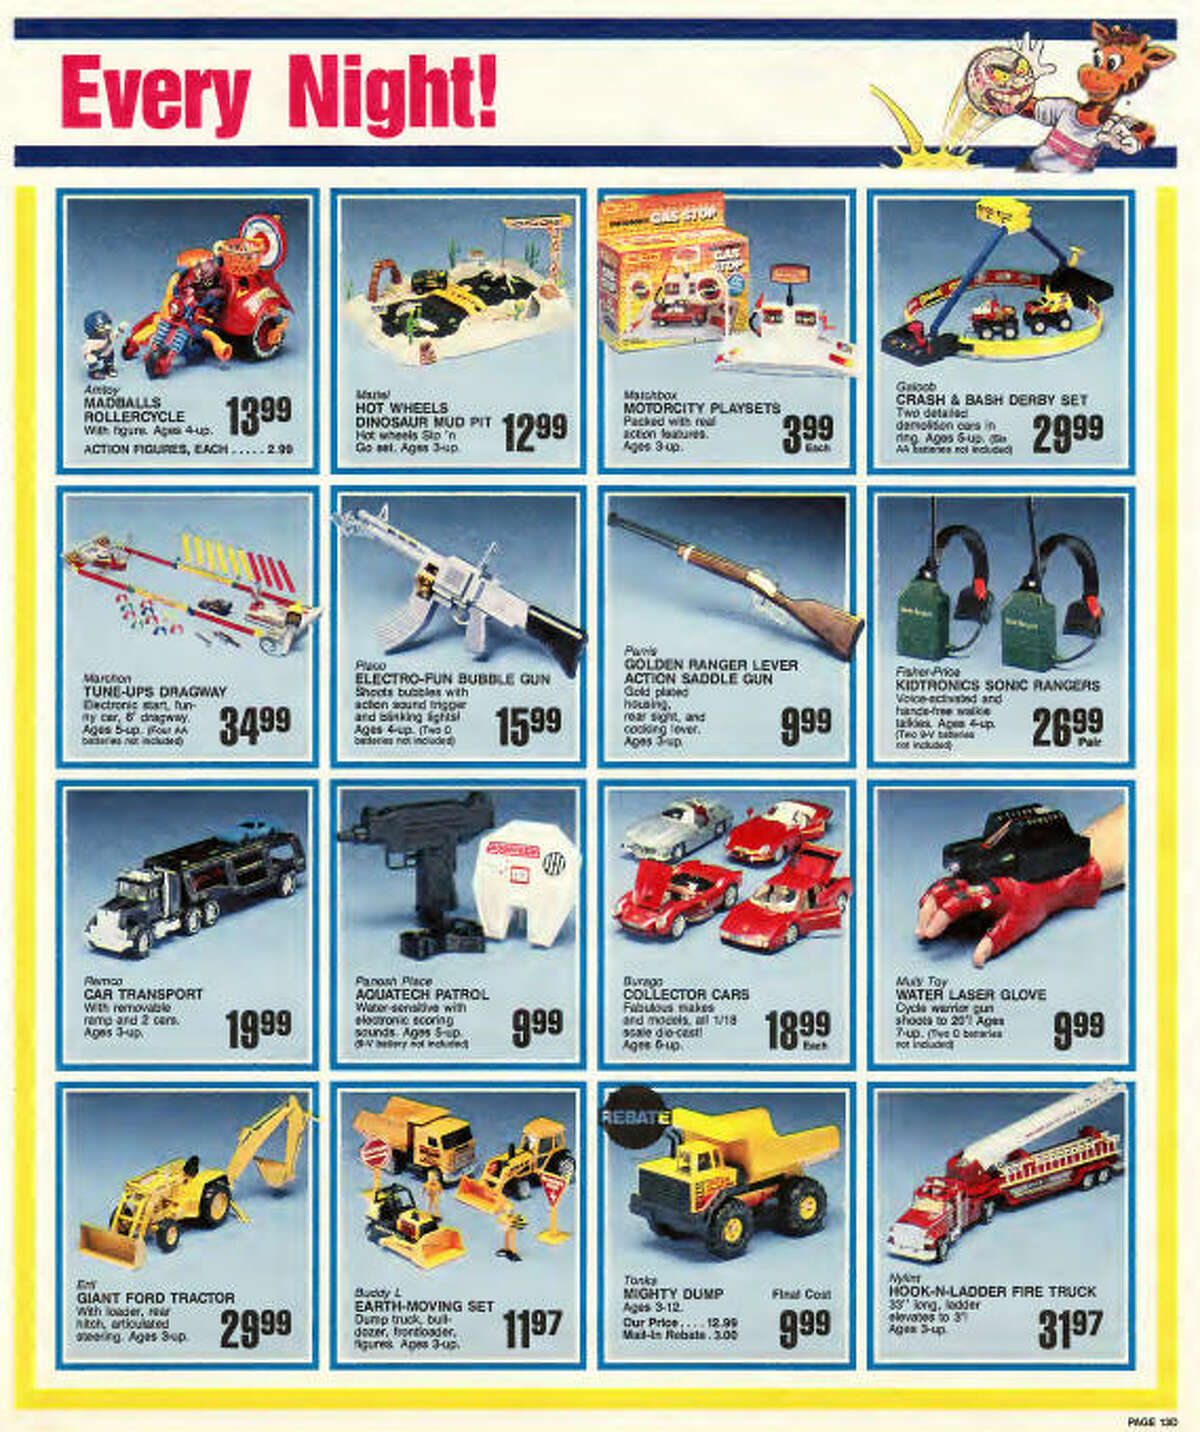 A user of the Archive.org website scanned a 1987 Toys 'R' Us flyer from that year's holiday season, filled with toys that would make millennials swoon for their bygone childhood. 